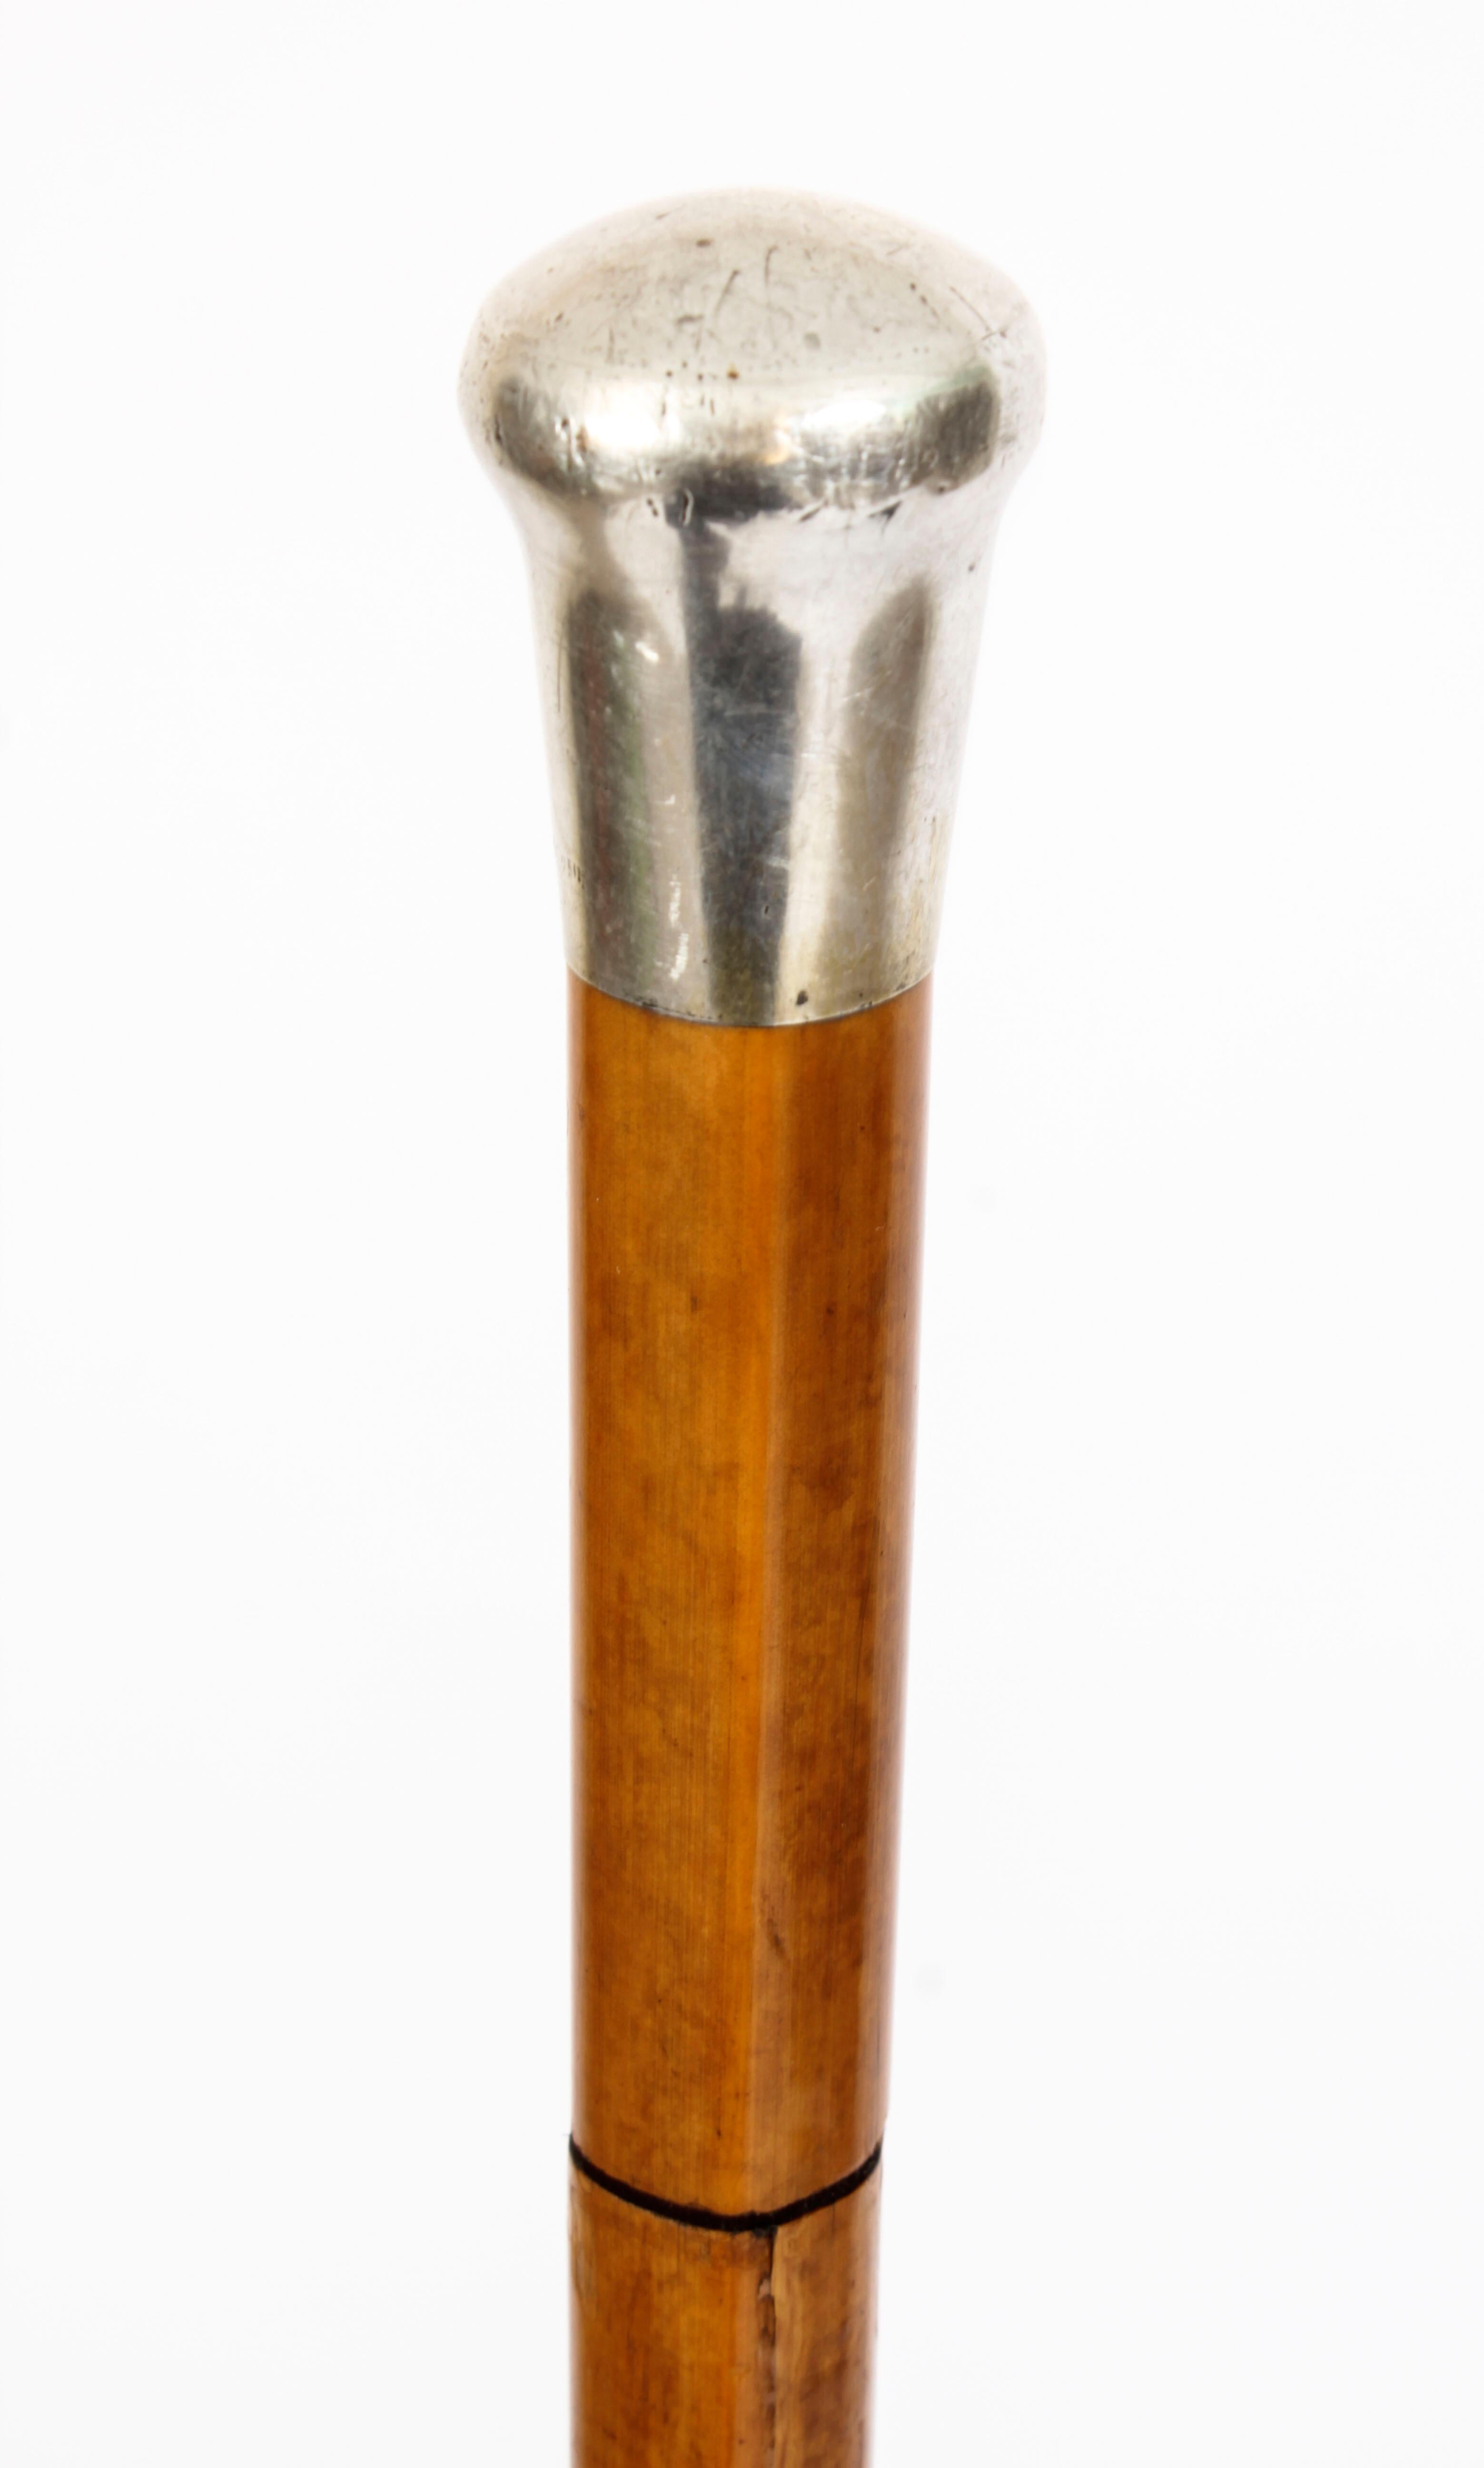 This is a beautiful antique English gentleman's malacca and sterling silver pommel walking / sword stick, circa 1890 in date.
 
The striking stick features a cylindrical shaped silver pommel on a gentle tapering malacca shaft. It has its original